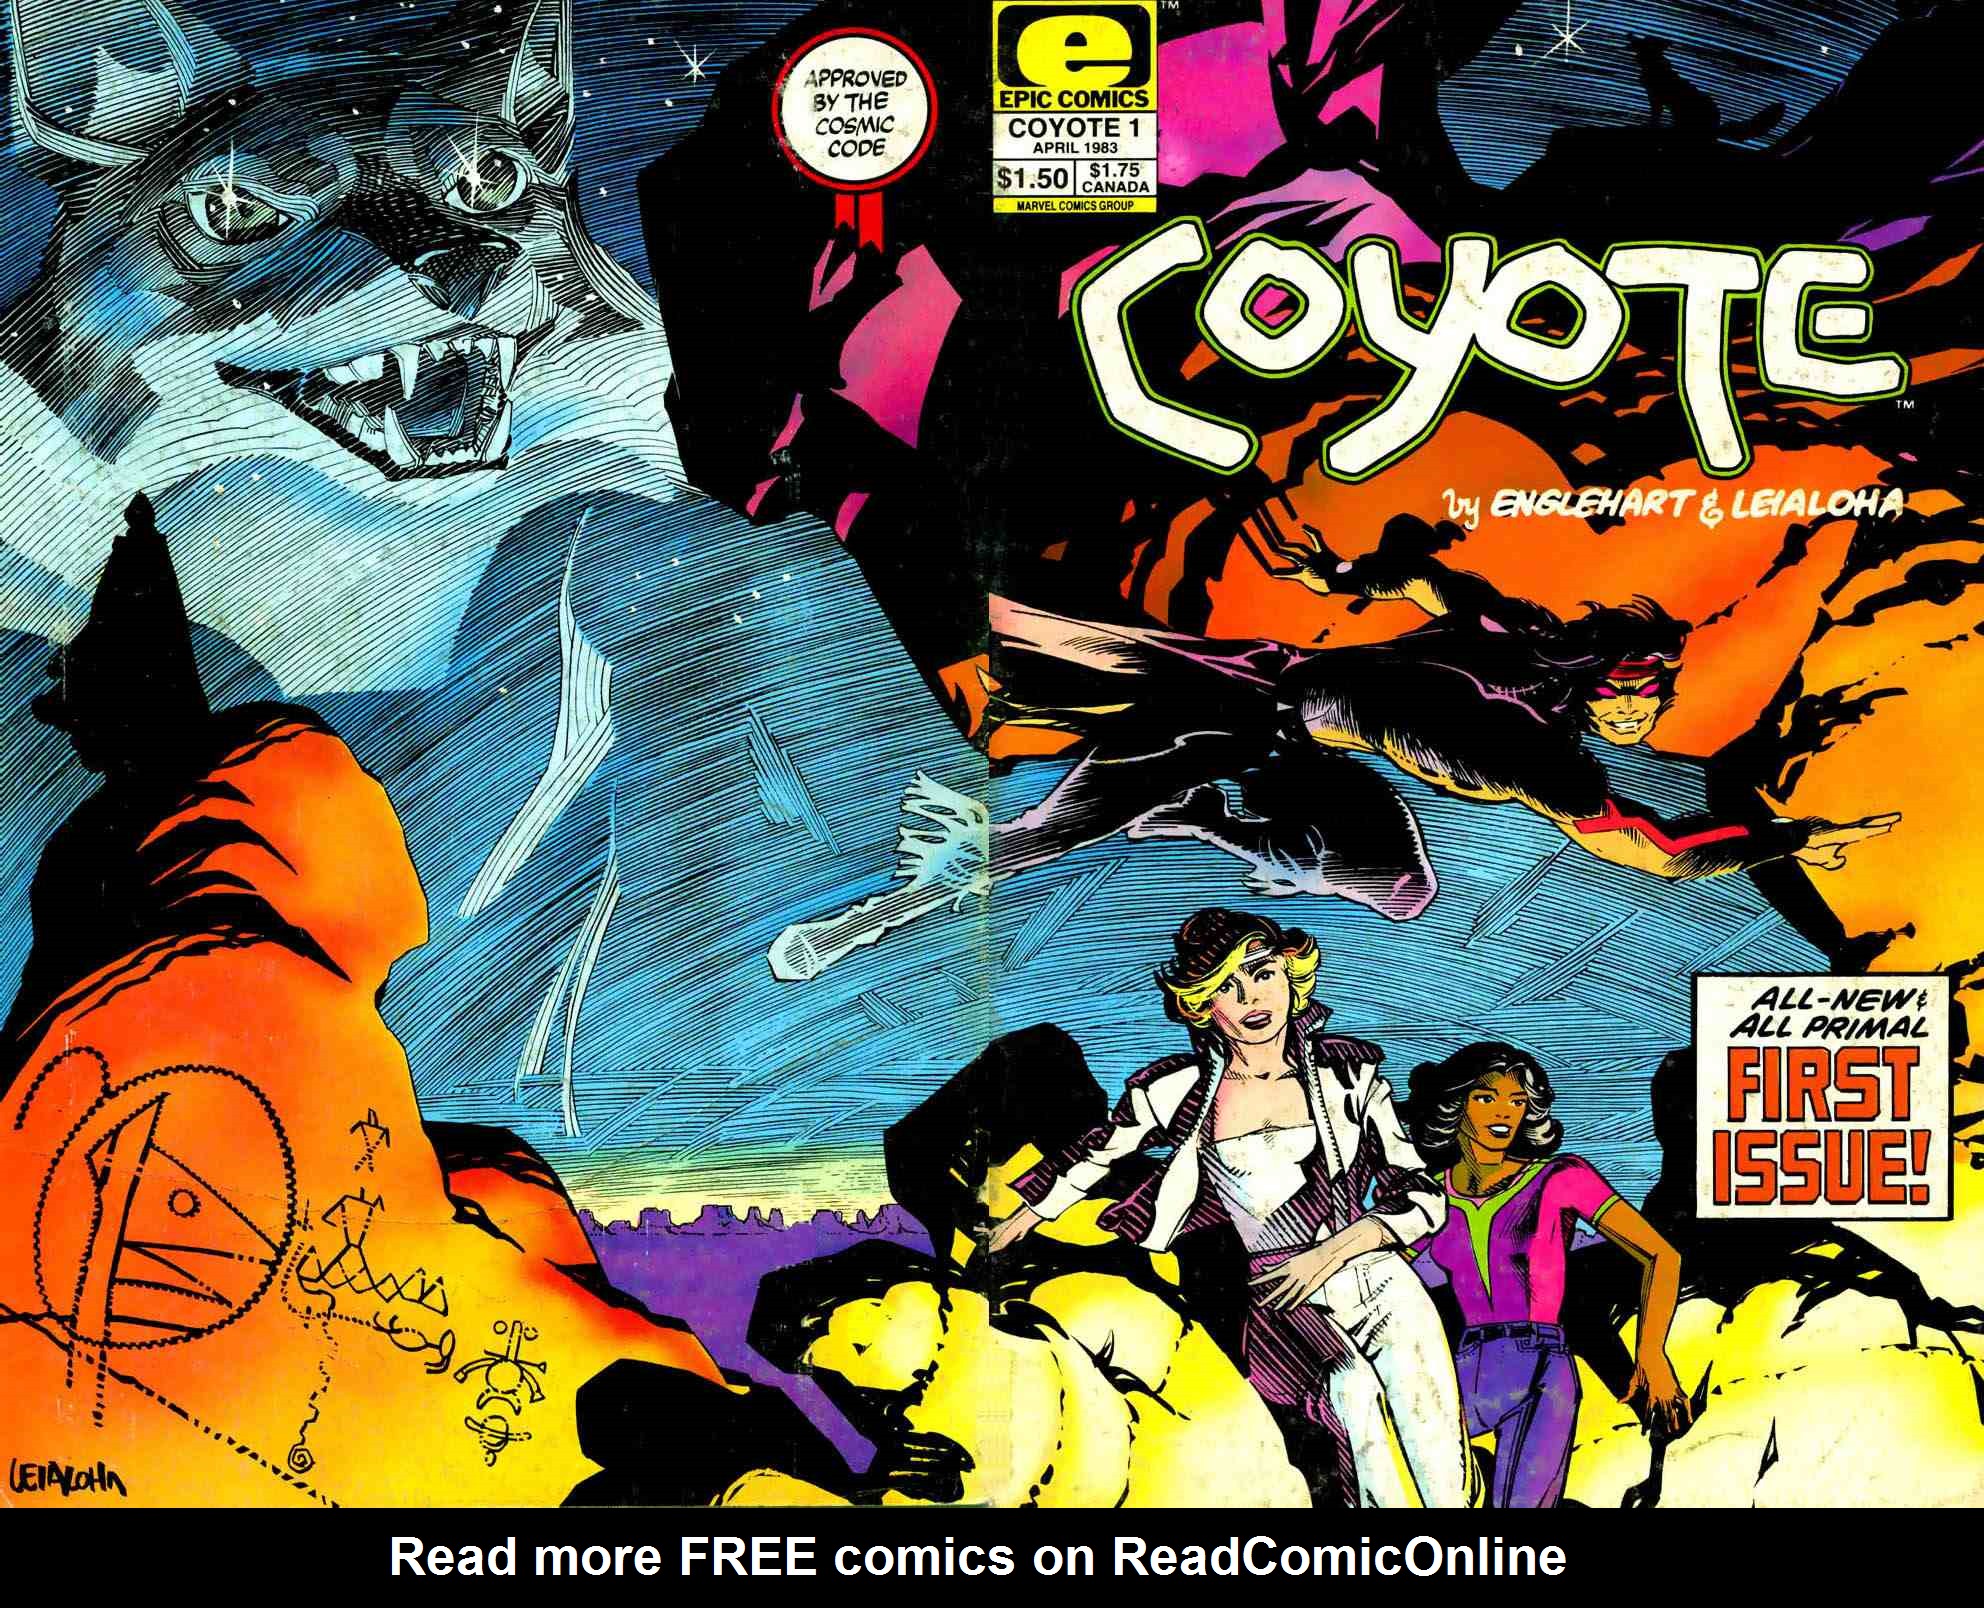 Read online Coyote comic -  Issue #1 - 1